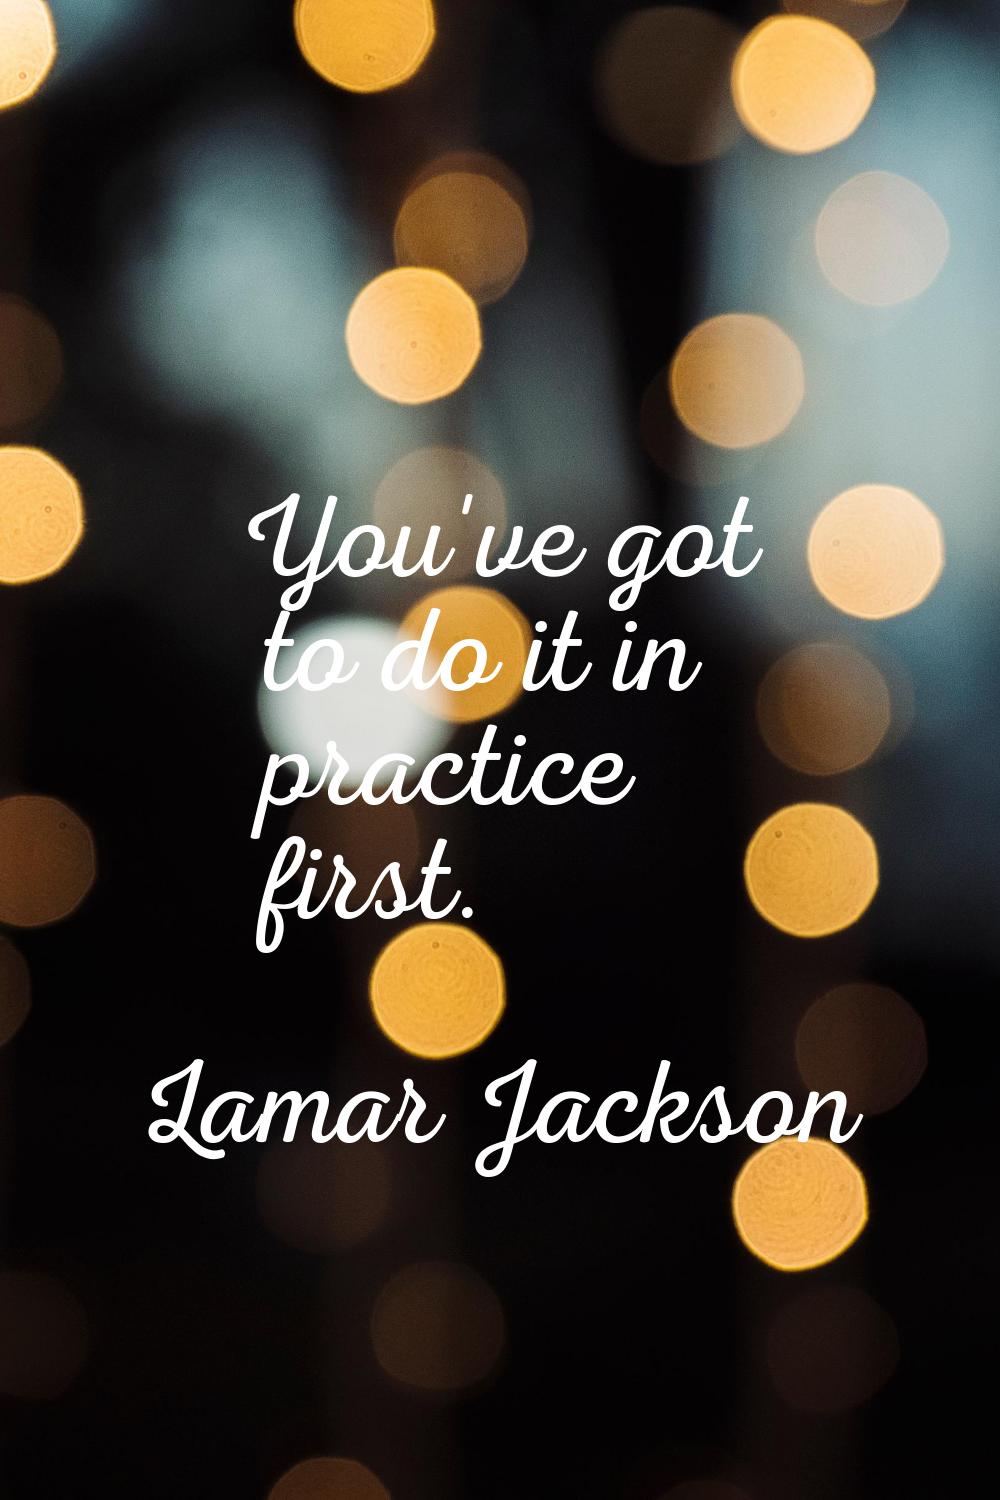 You've got to do it in practice first.